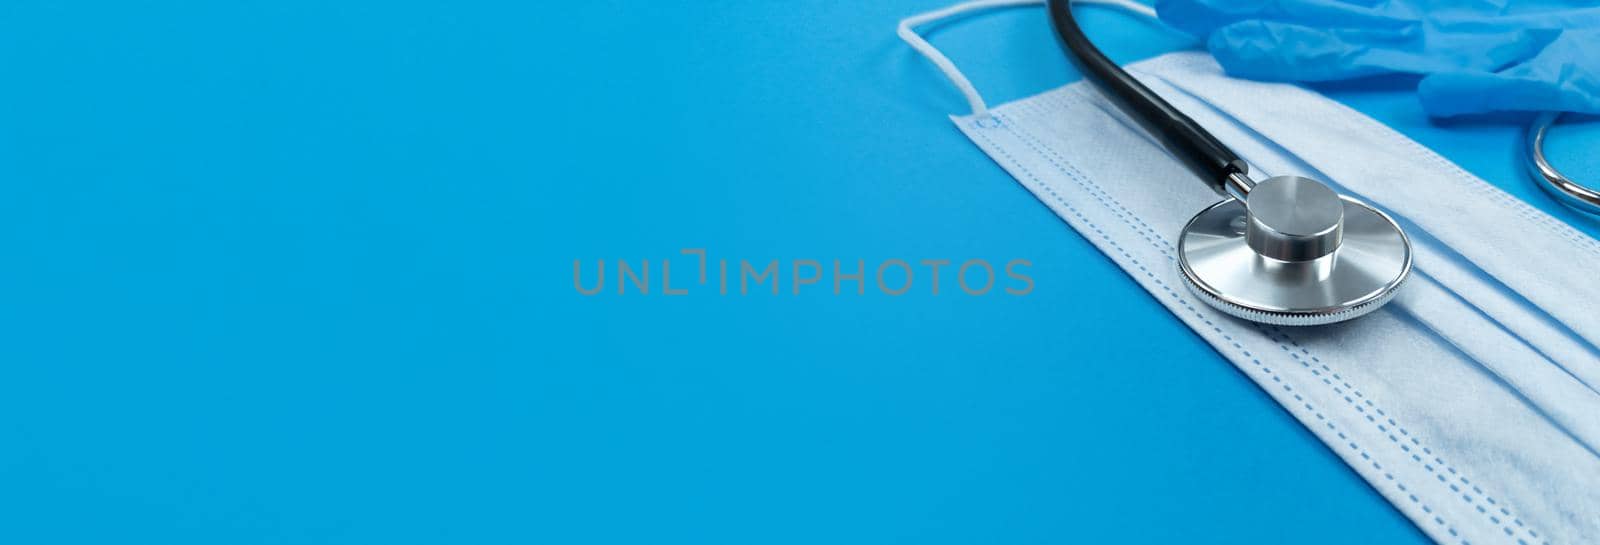 Stethoscope, face mask and medical gloves on a blue background. Medical banner with copy space.